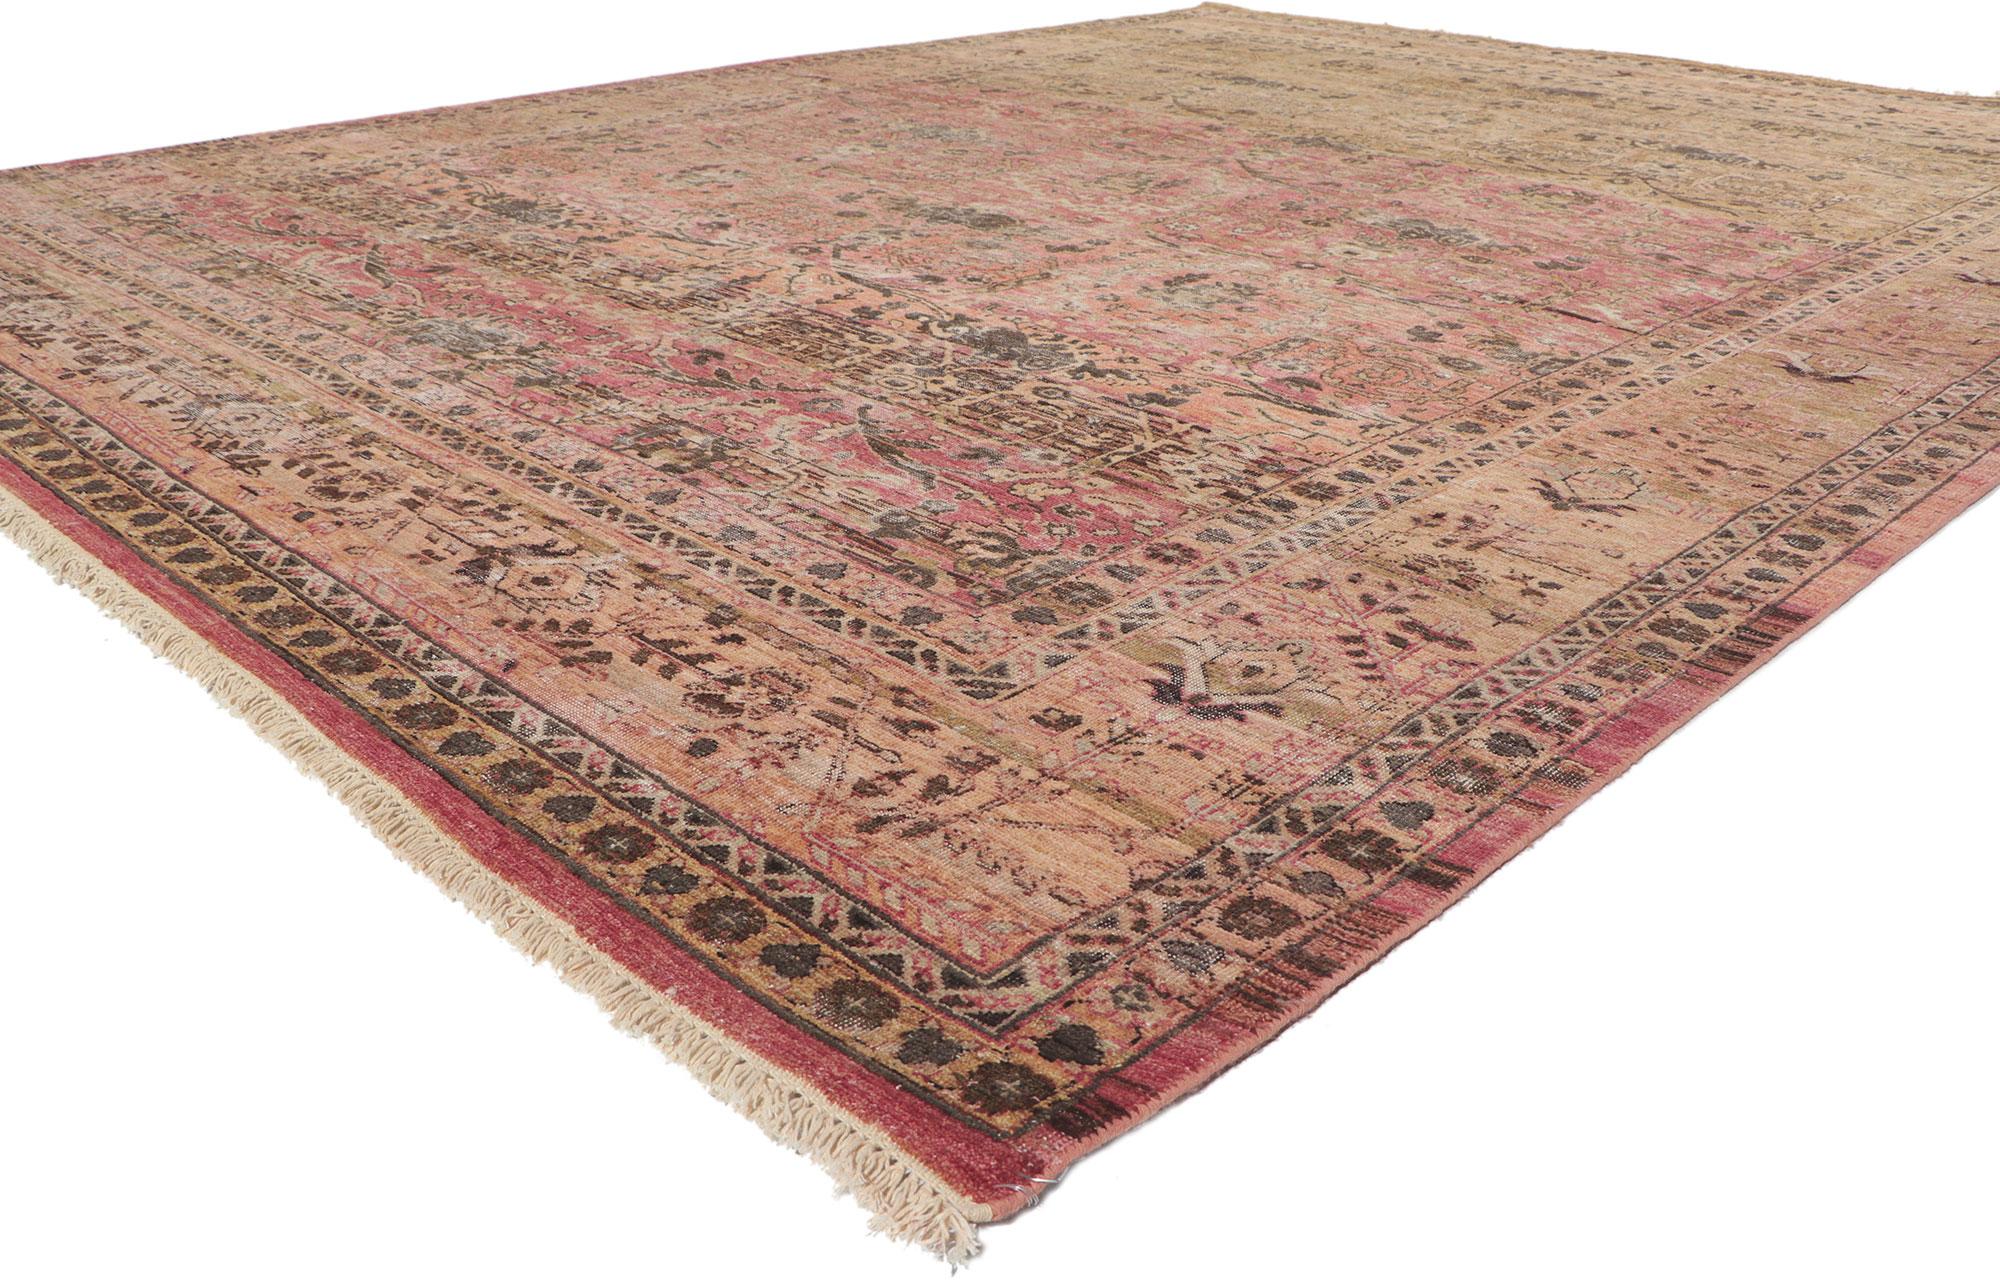 30778 New modern distressed rug with vintage style 09'02 x 11'11. With its Indian summer colors and weathered beauty combined with nostalgic charm, this new contemporary distressed rug creates an inimitable warmth and calming ambiance. The botanical